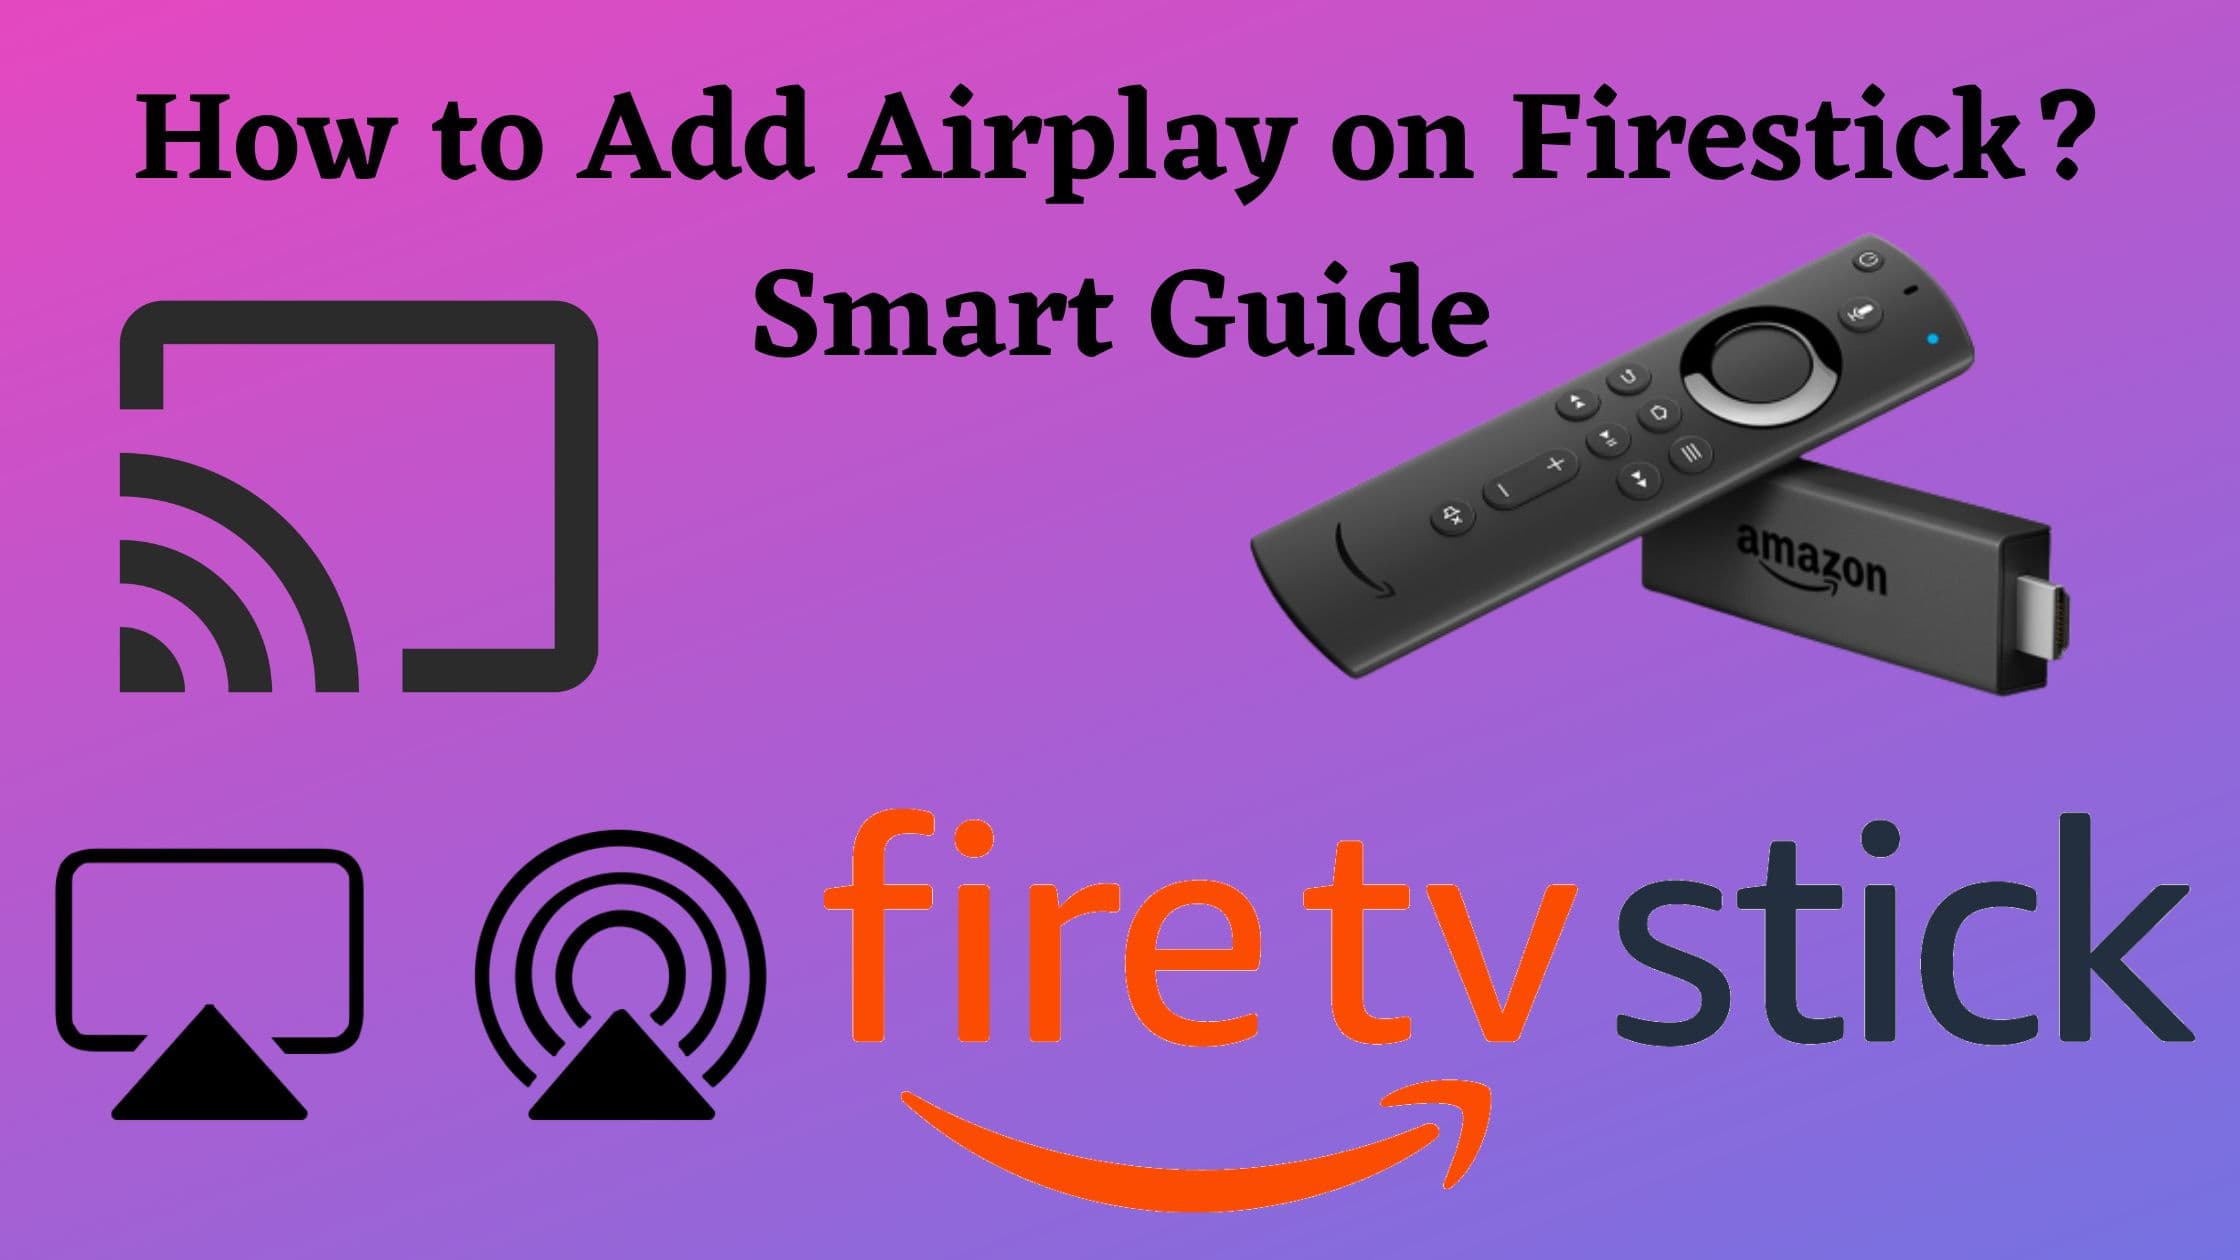 How to Add Airplay to Firestick